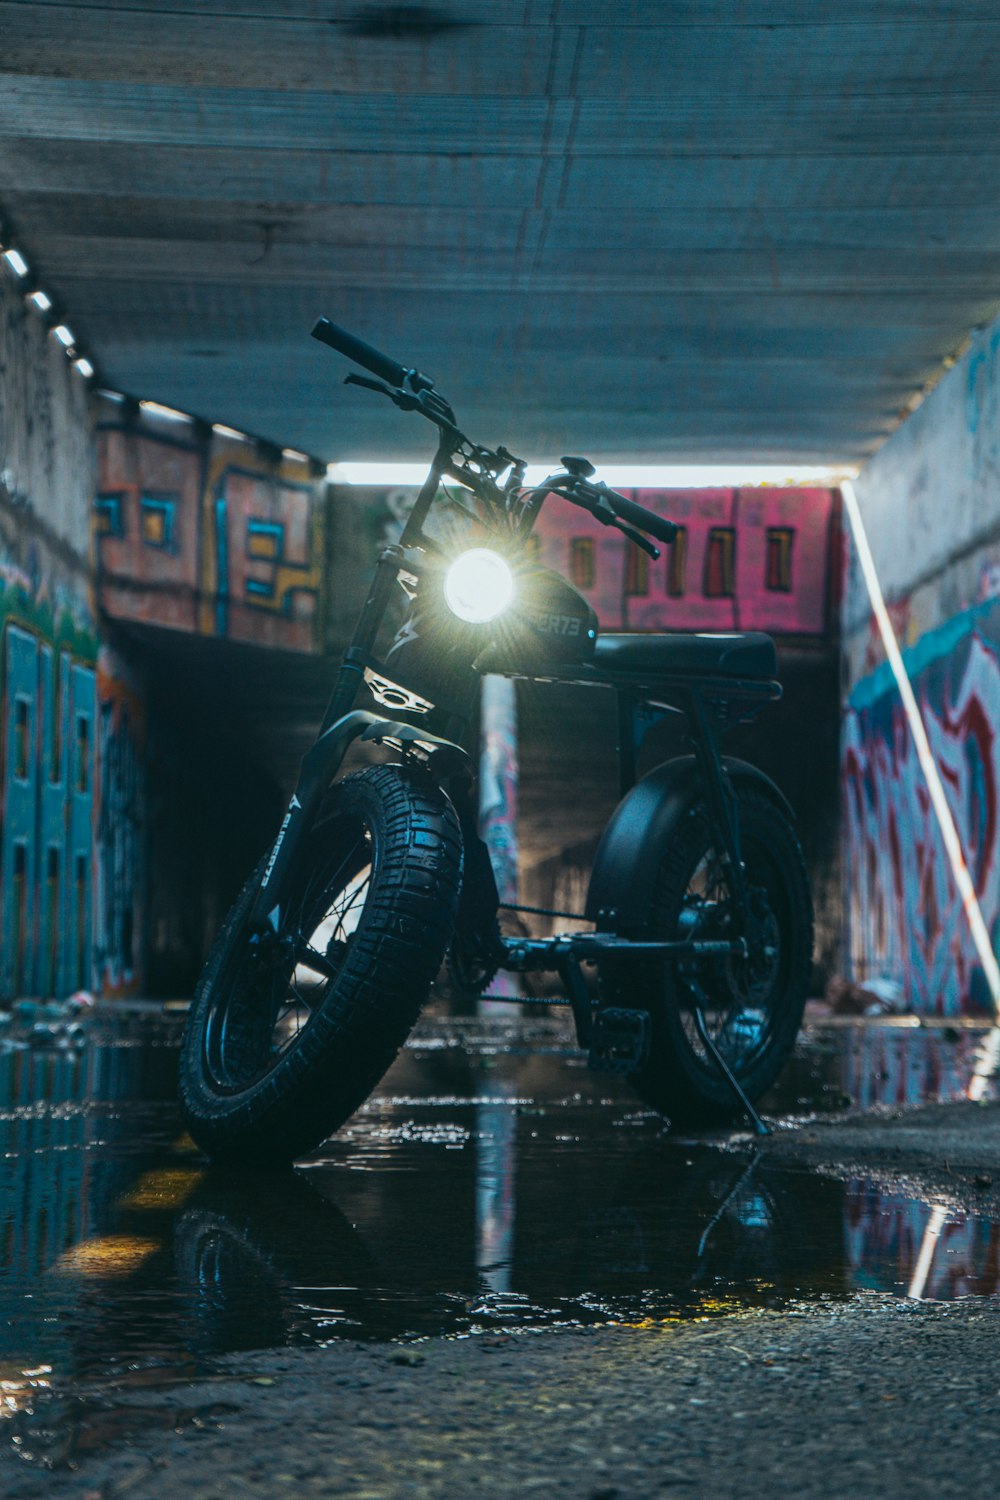 a motorcycle parked in a tunnel with graffiti on the walls